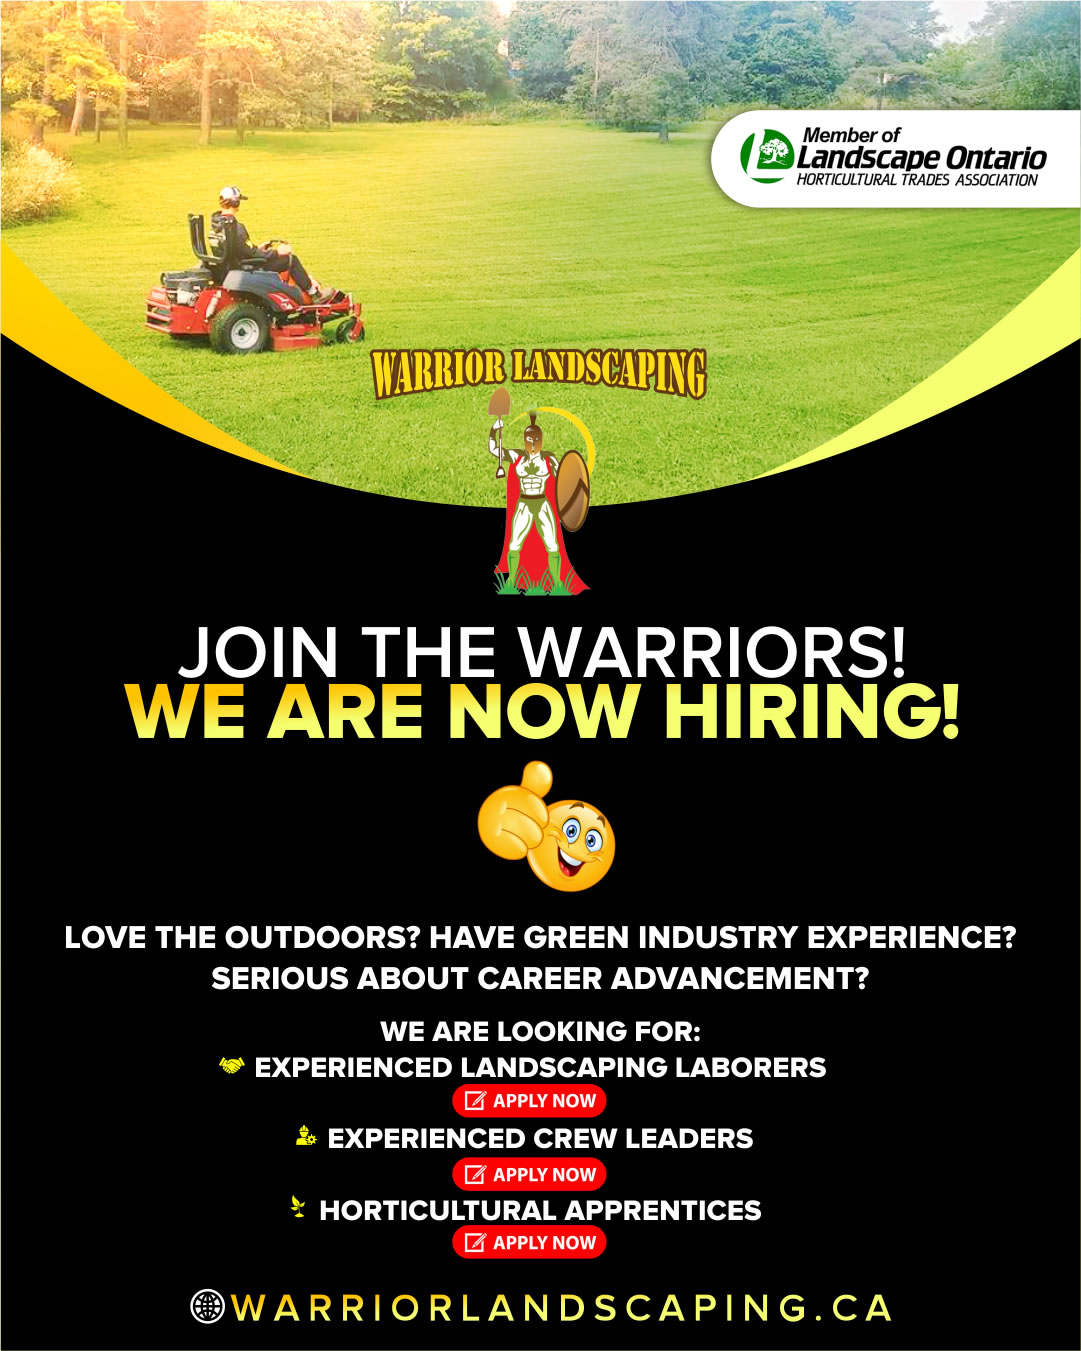 Landscaping Jobs Near Mississauga Ontario, Landscaping Now Hiring